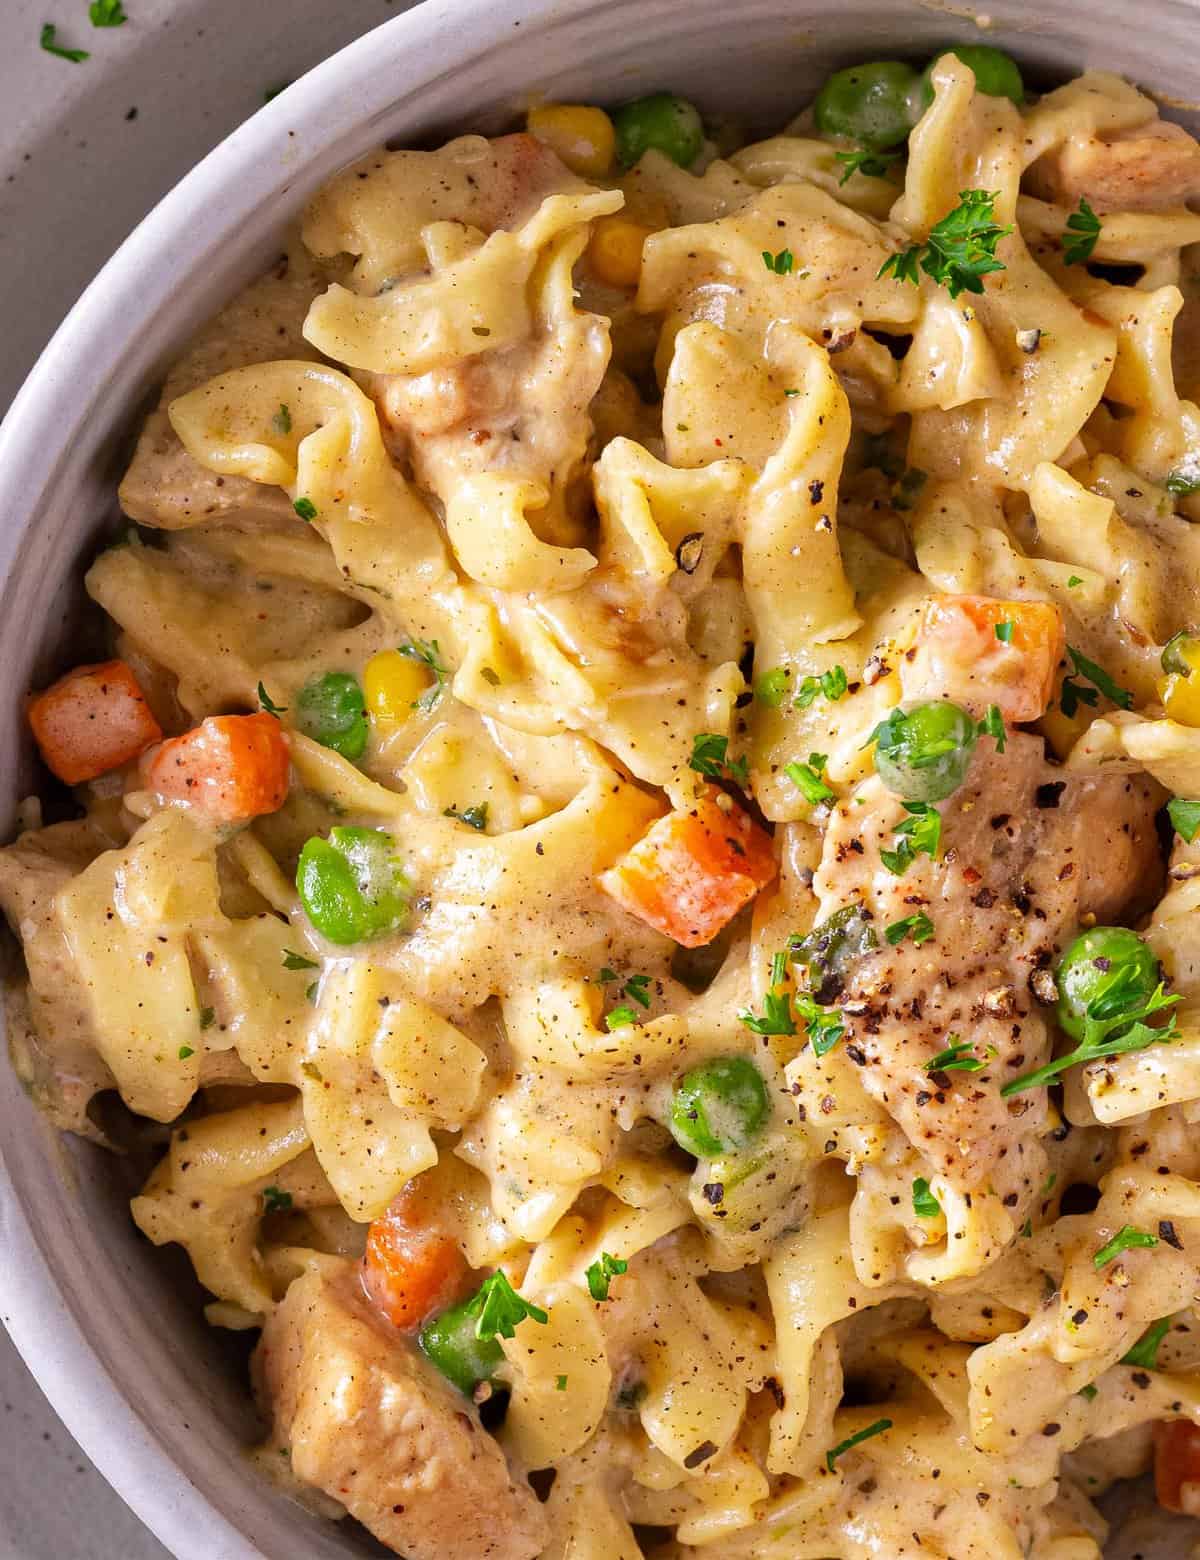 Creamy chicken pot pie pasta is the perfect marriage of a deliciously creamy pasta dish and a classic chicken pot pie. Perfect for a family dinner, this recipe is pure comfort in a bowl!